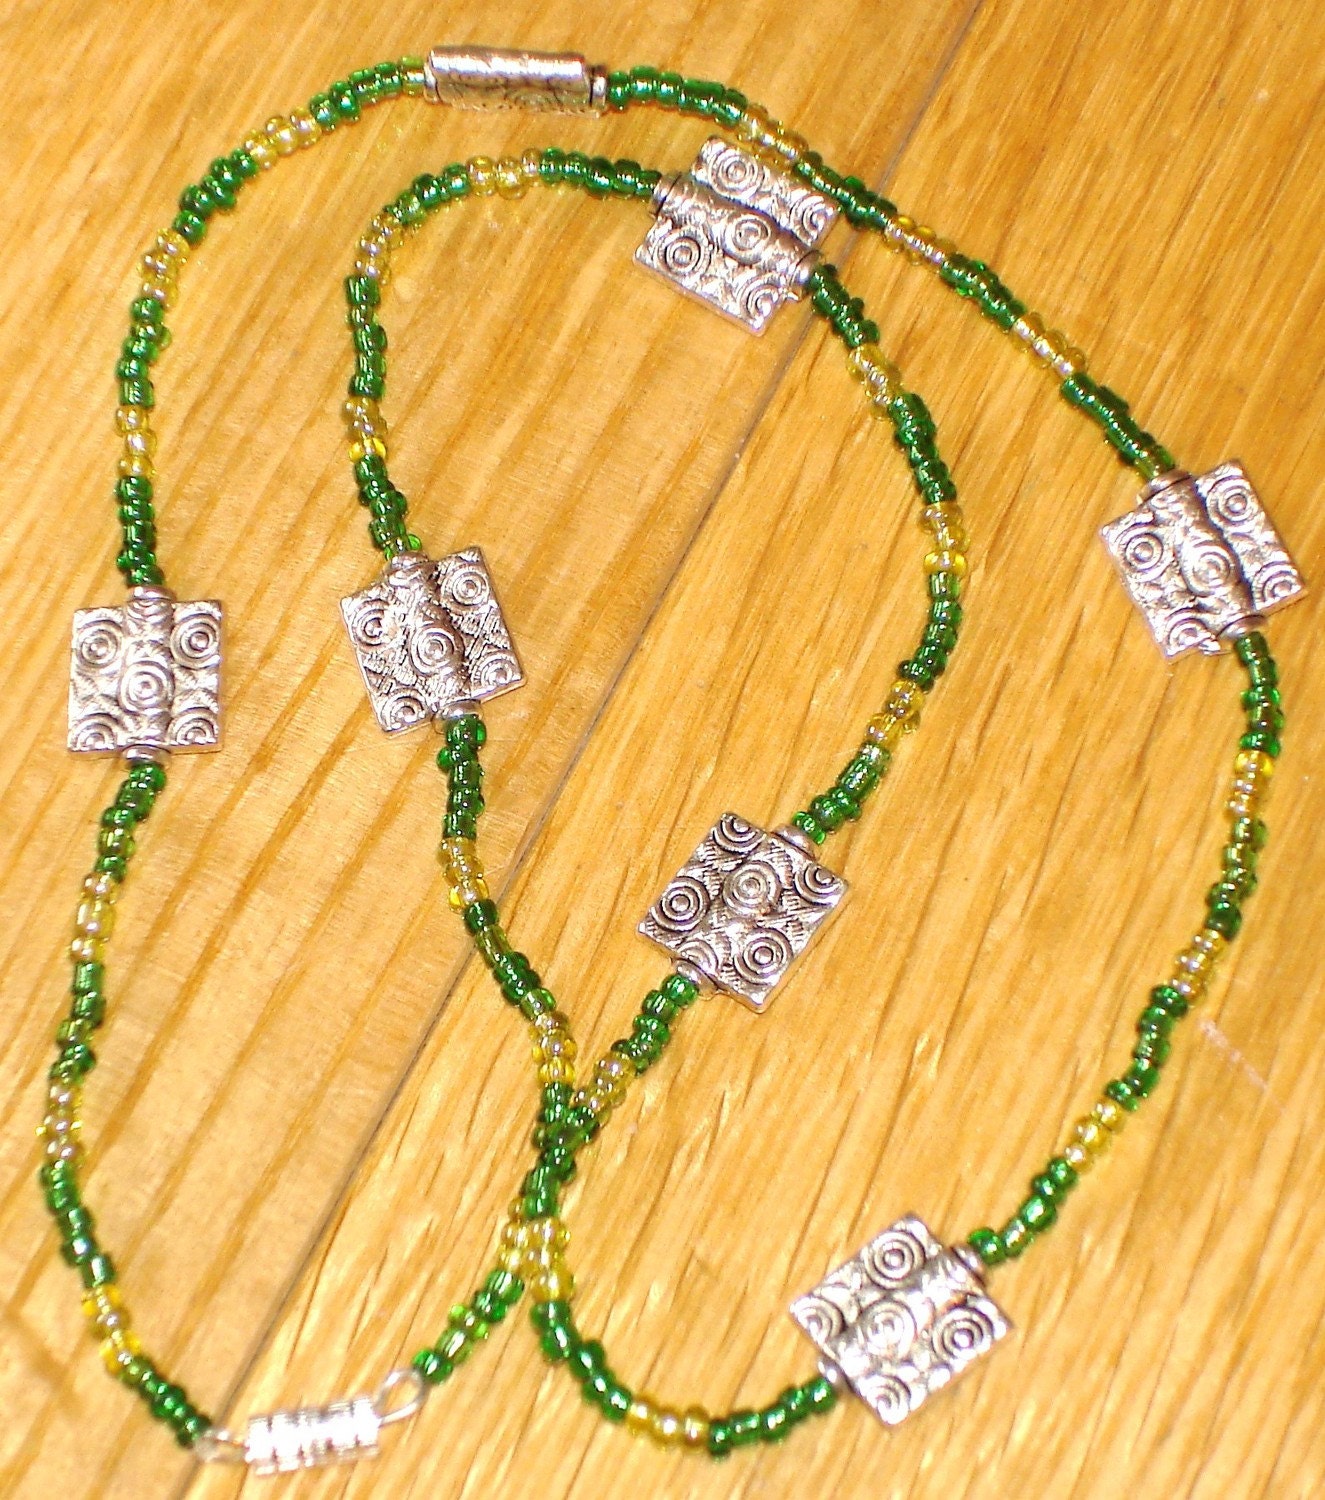 Green and silver necklace